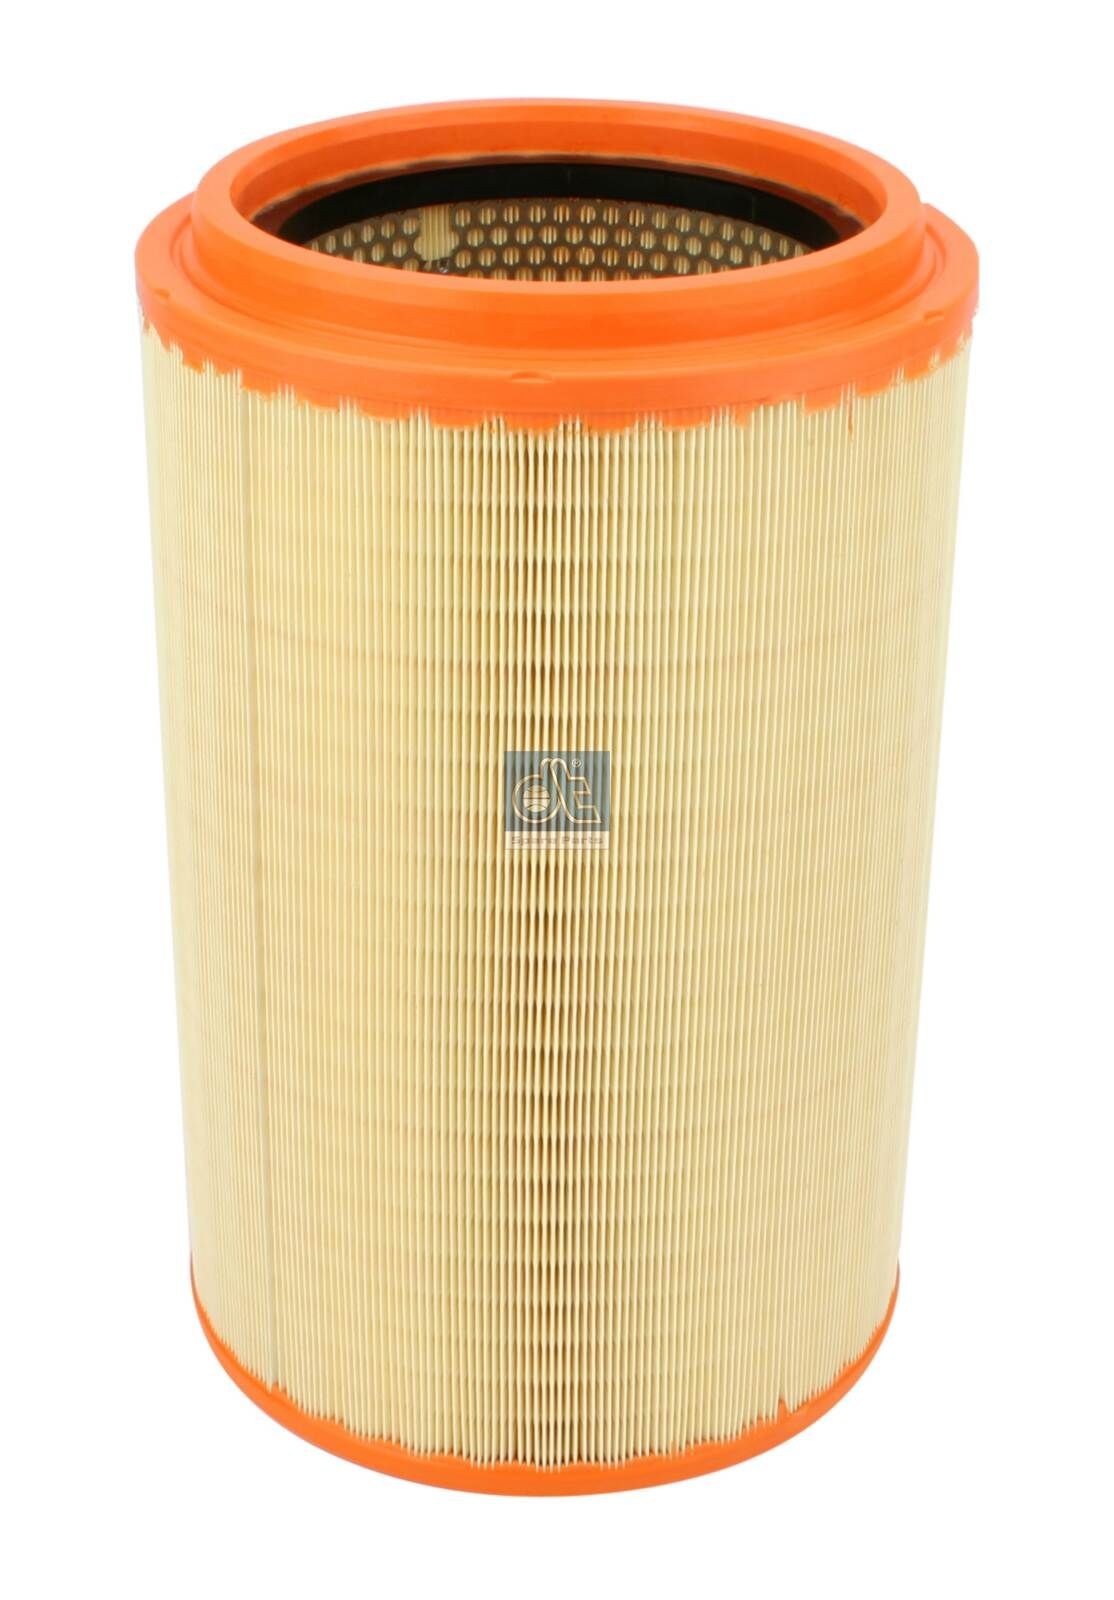 DT Spare Parts 389mm, 247mm, Filter Insert Height: 389mm Engine air filter 5.45154 buy